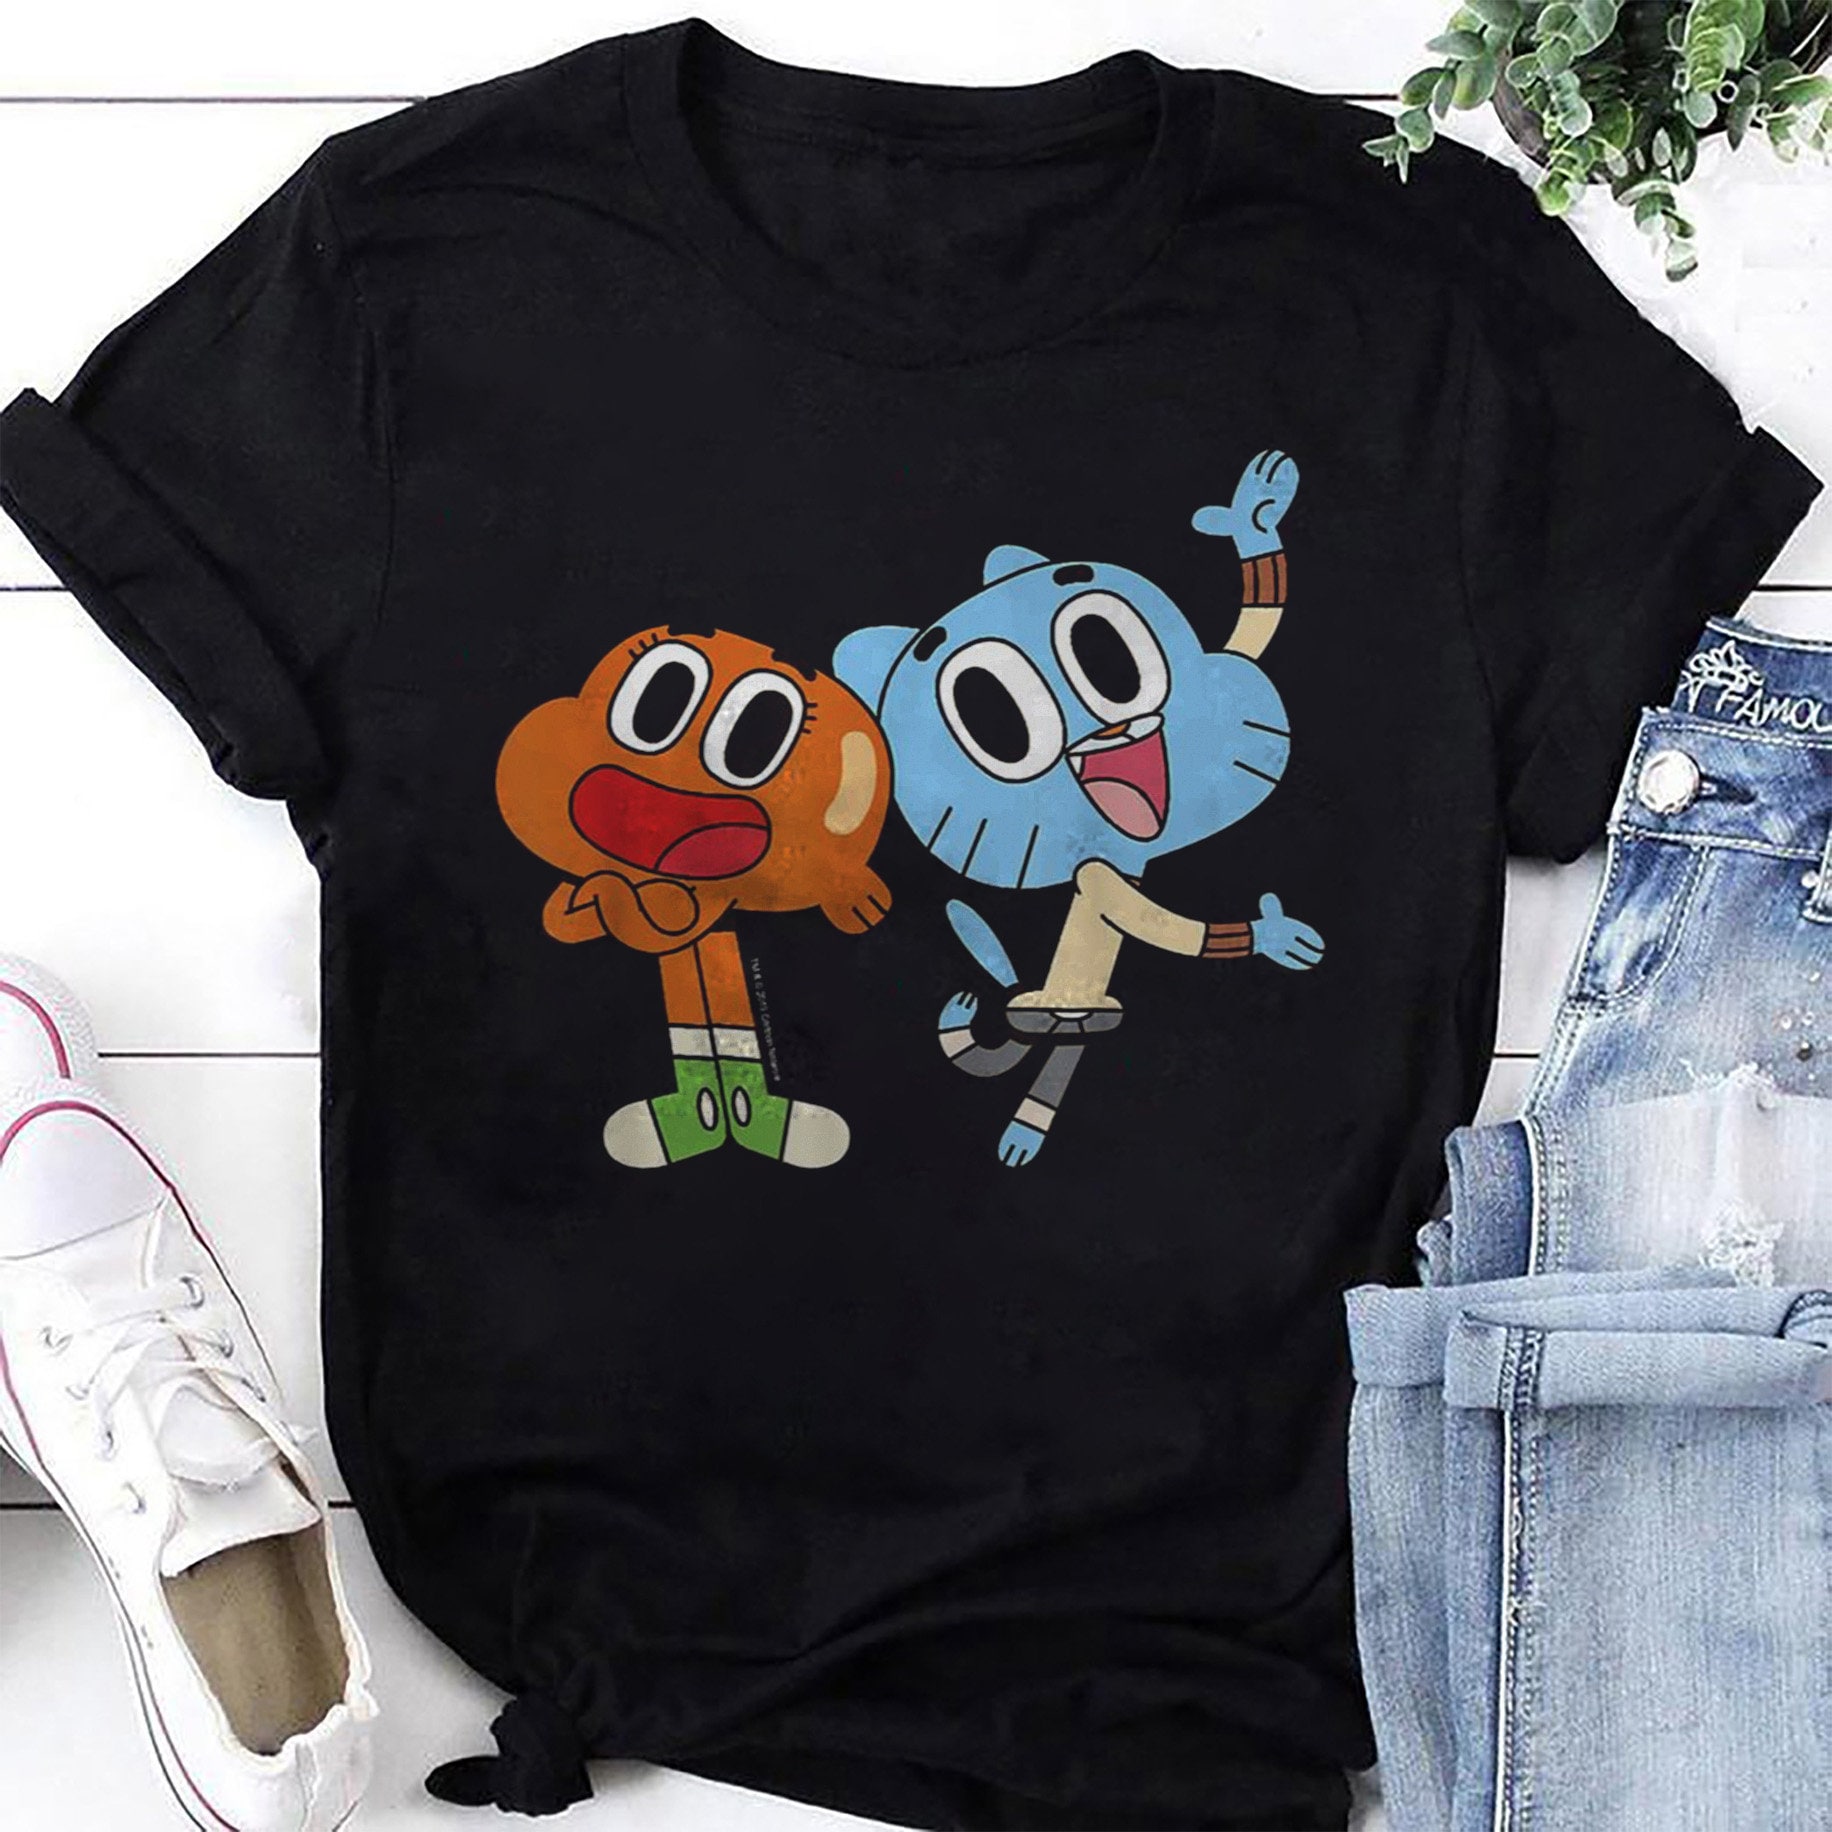 Gumball Watterson Costume, Carbon Costume